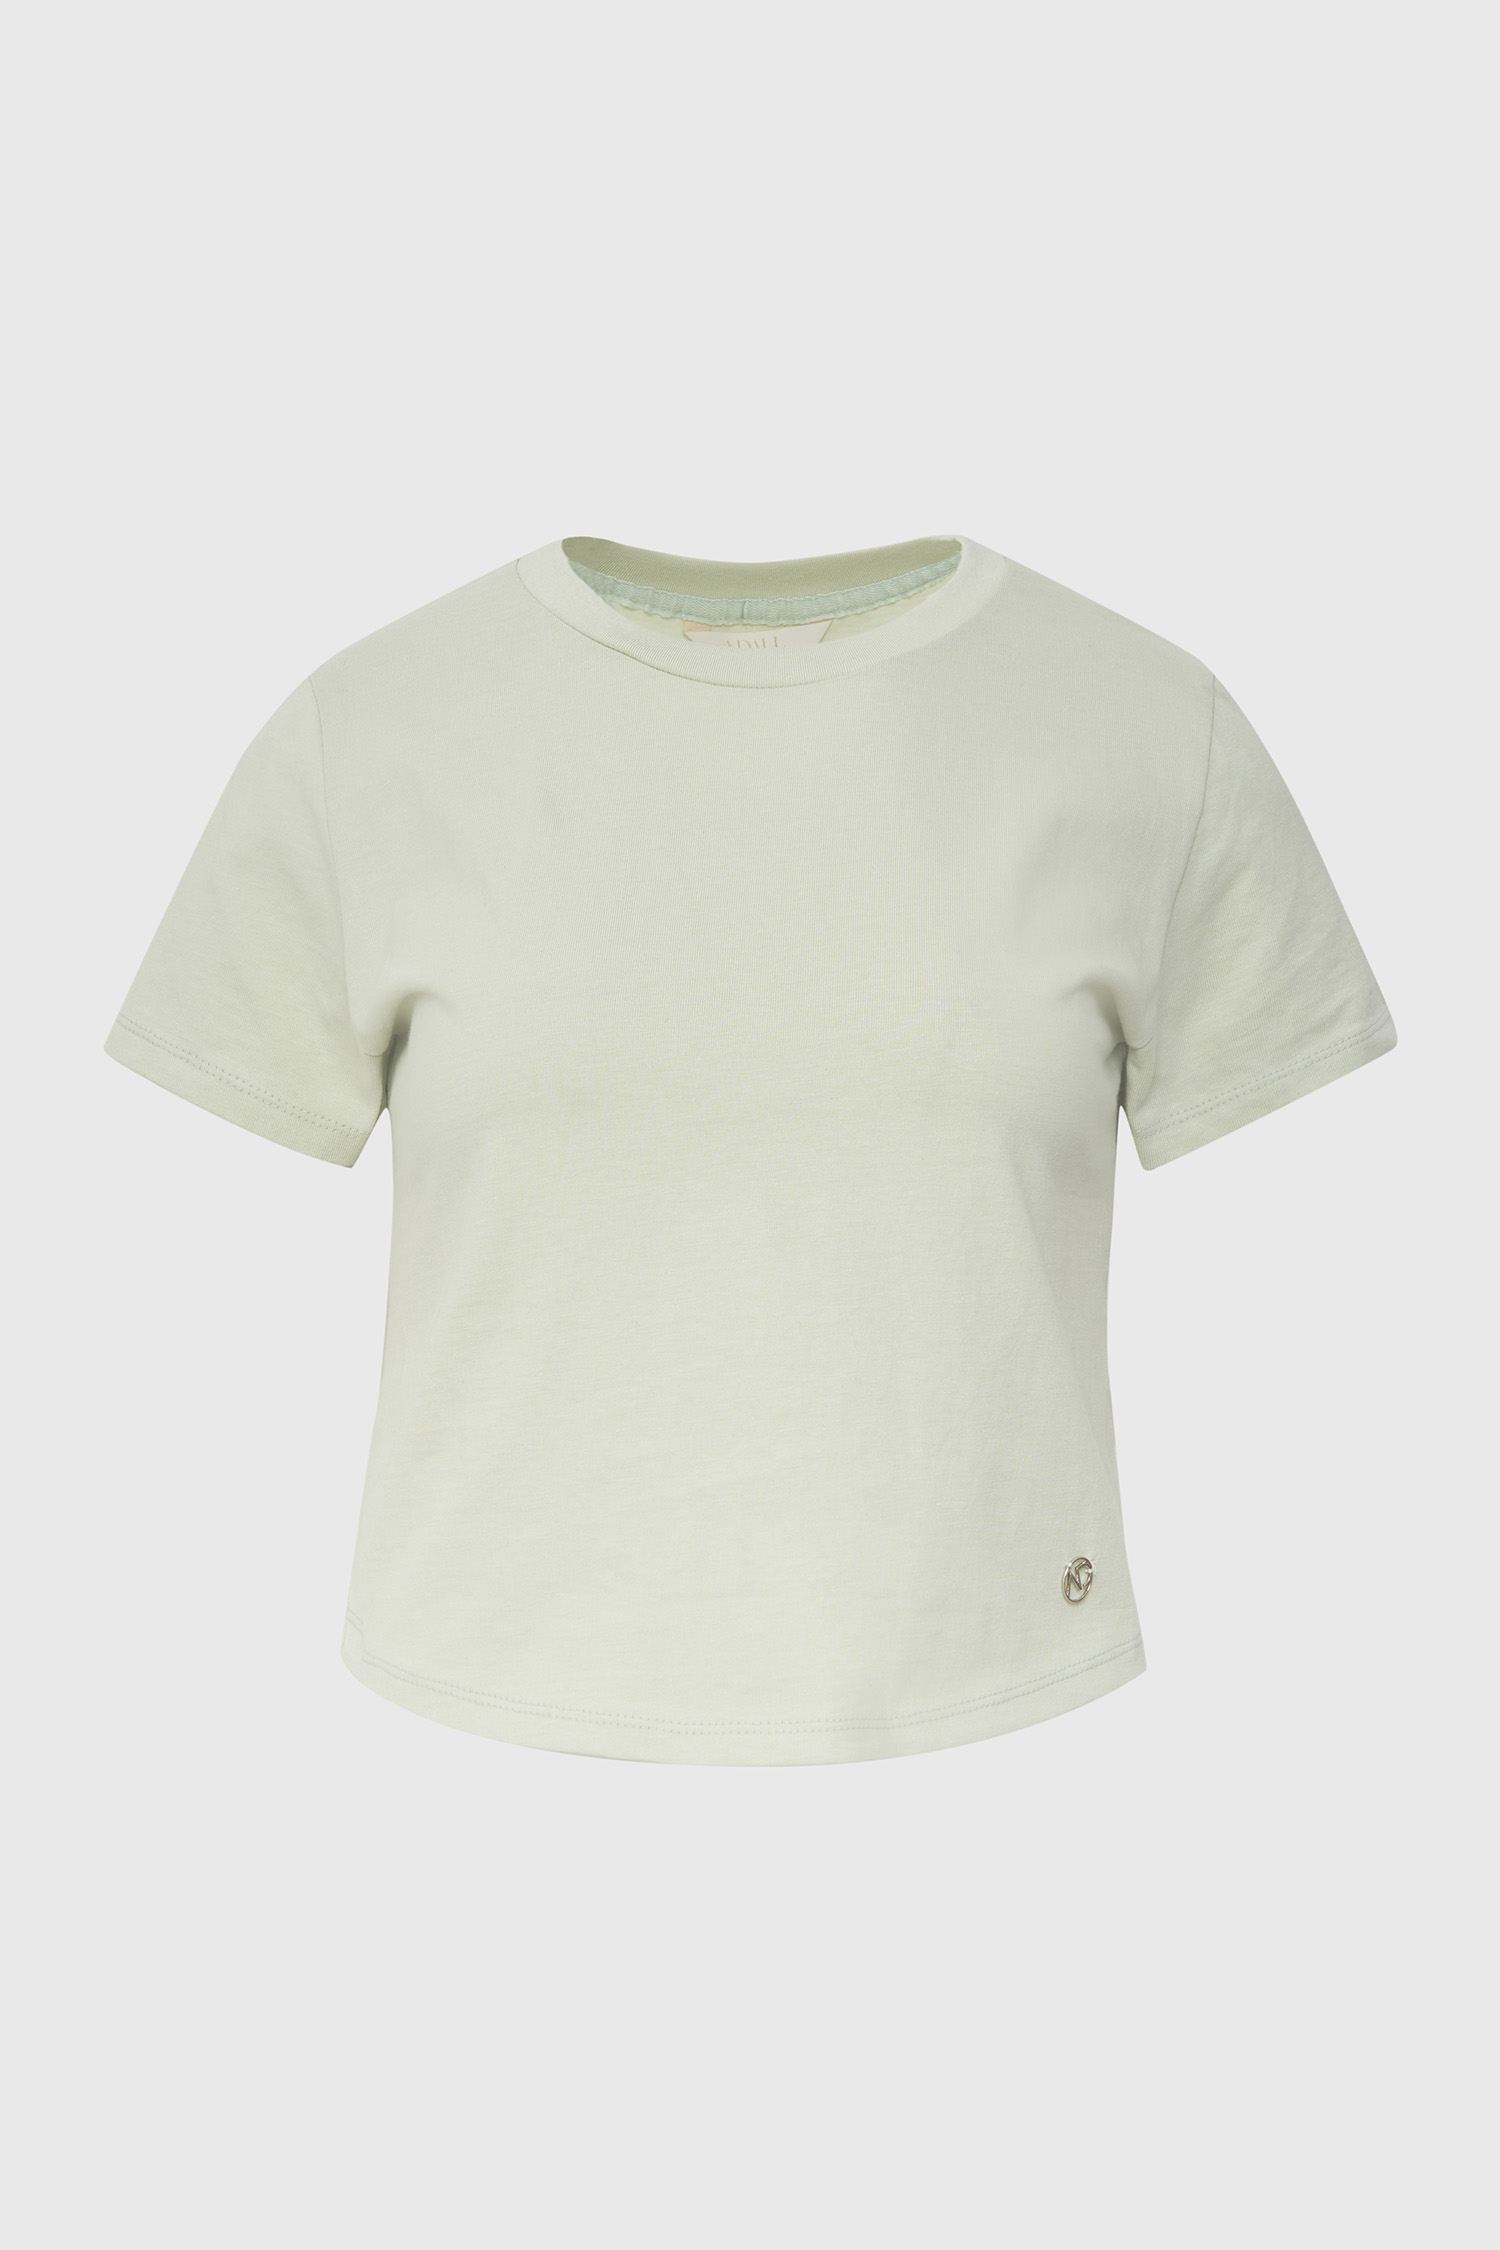 Basic AD silver point t shirt - mint